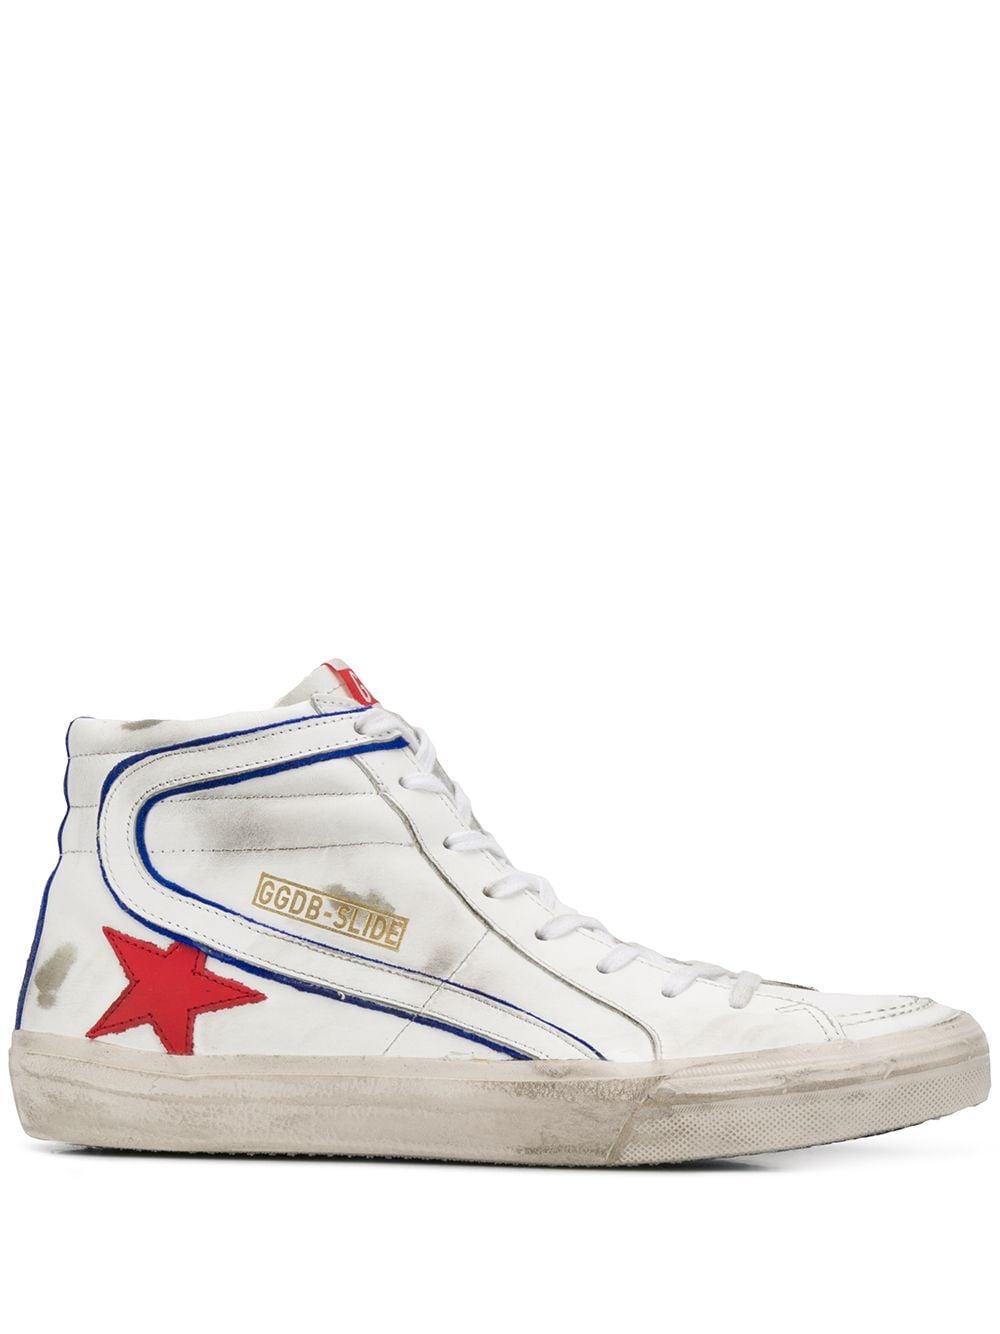 Golden Goose Deluxe Brand Leather Slide Hi-top Sneakers in White for ...